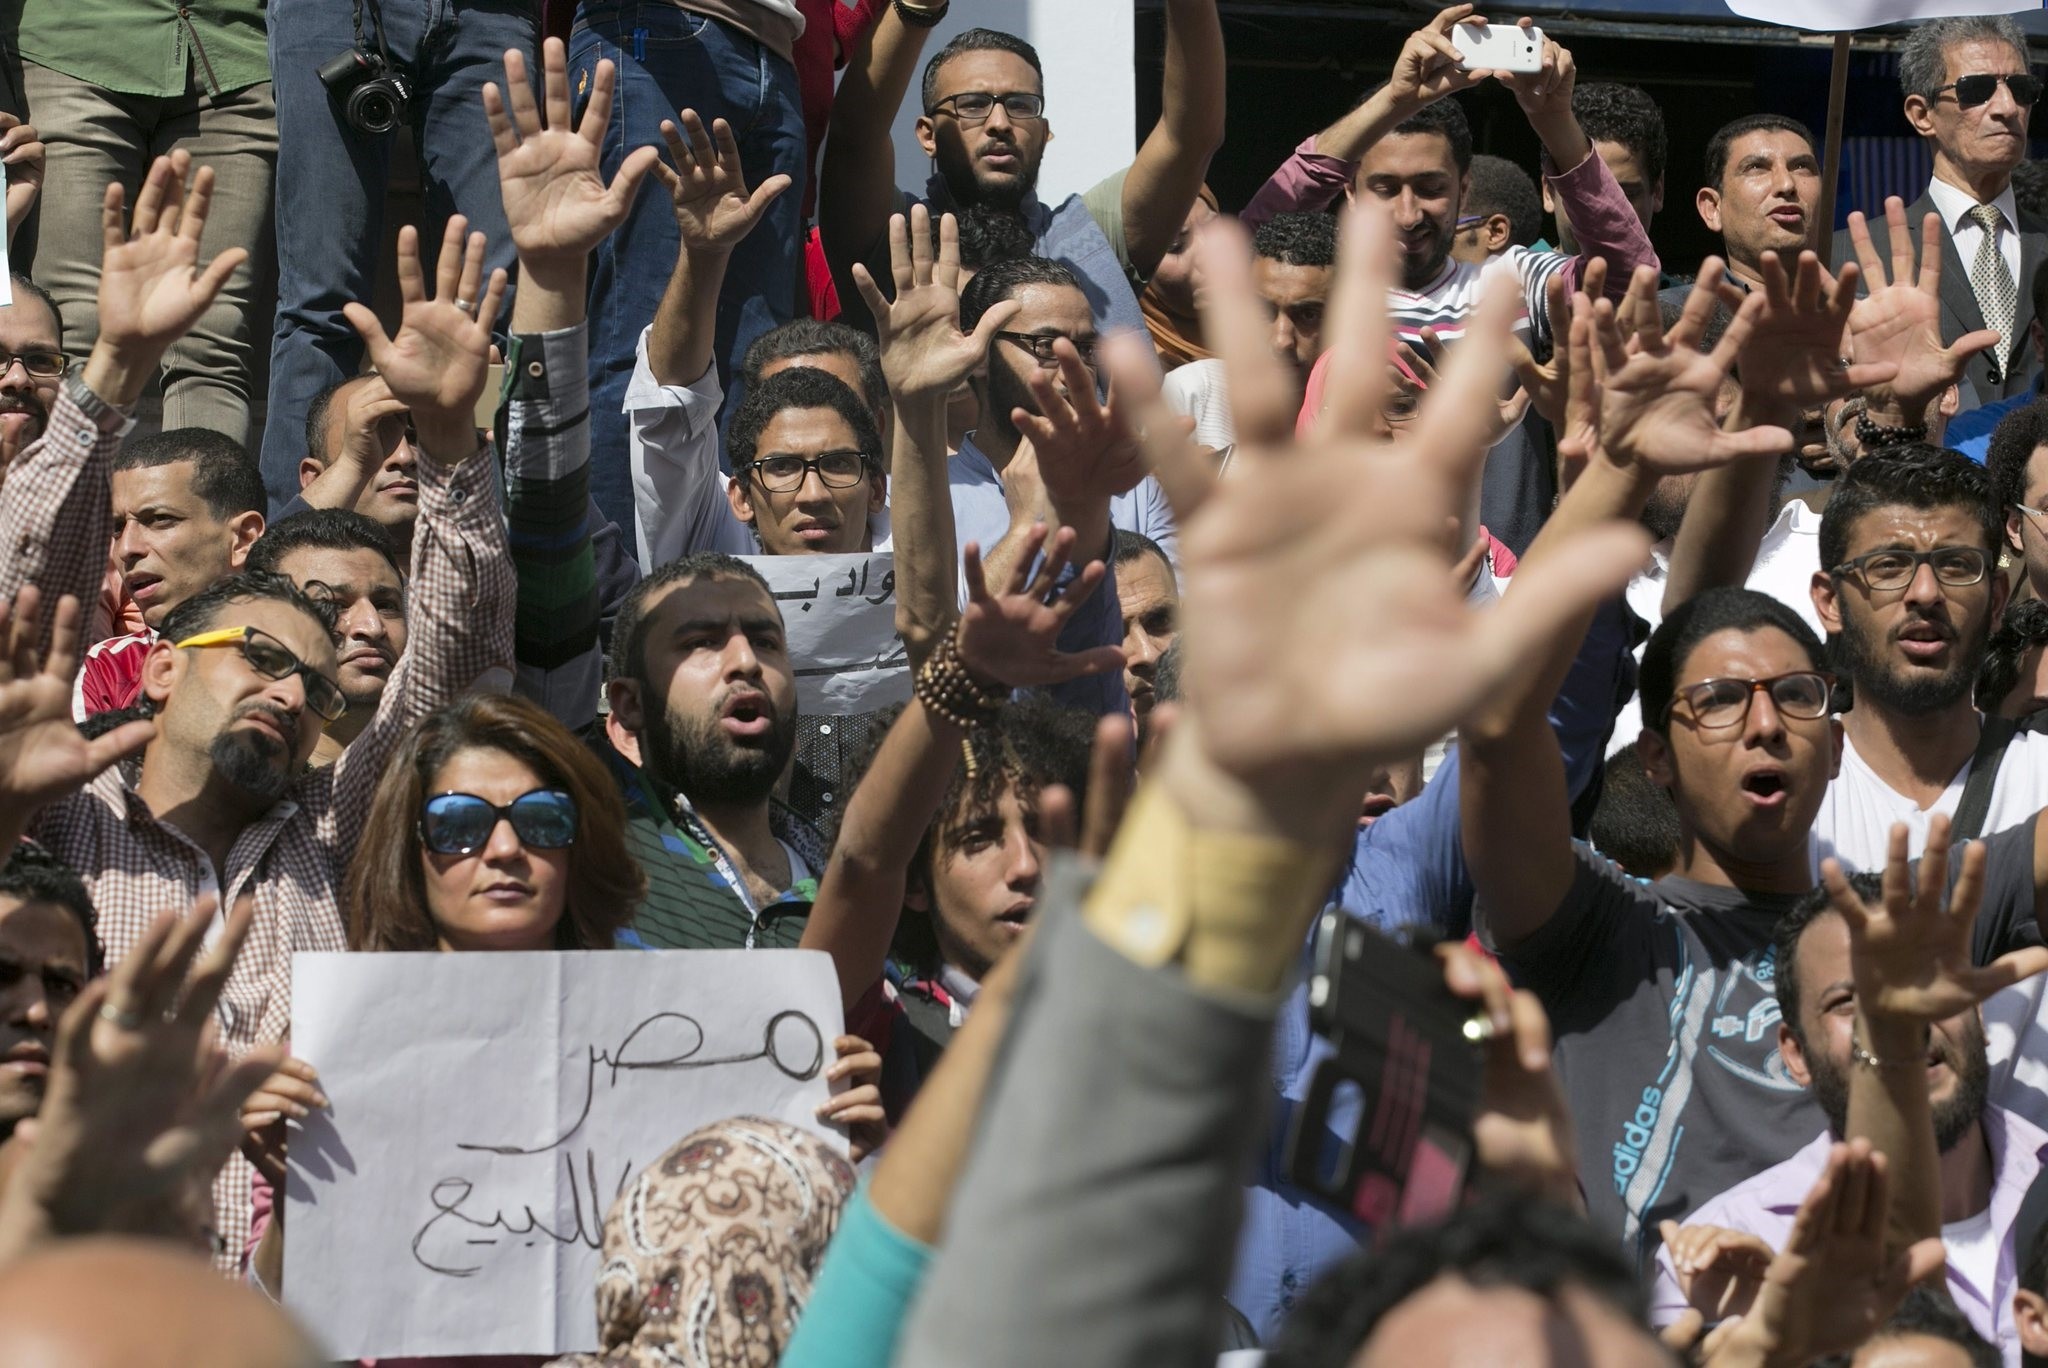 Egyptians shout slogans against Egyptian President Abdel-Fattah el-Sissi during a protest in Cairo. (AP Photo)